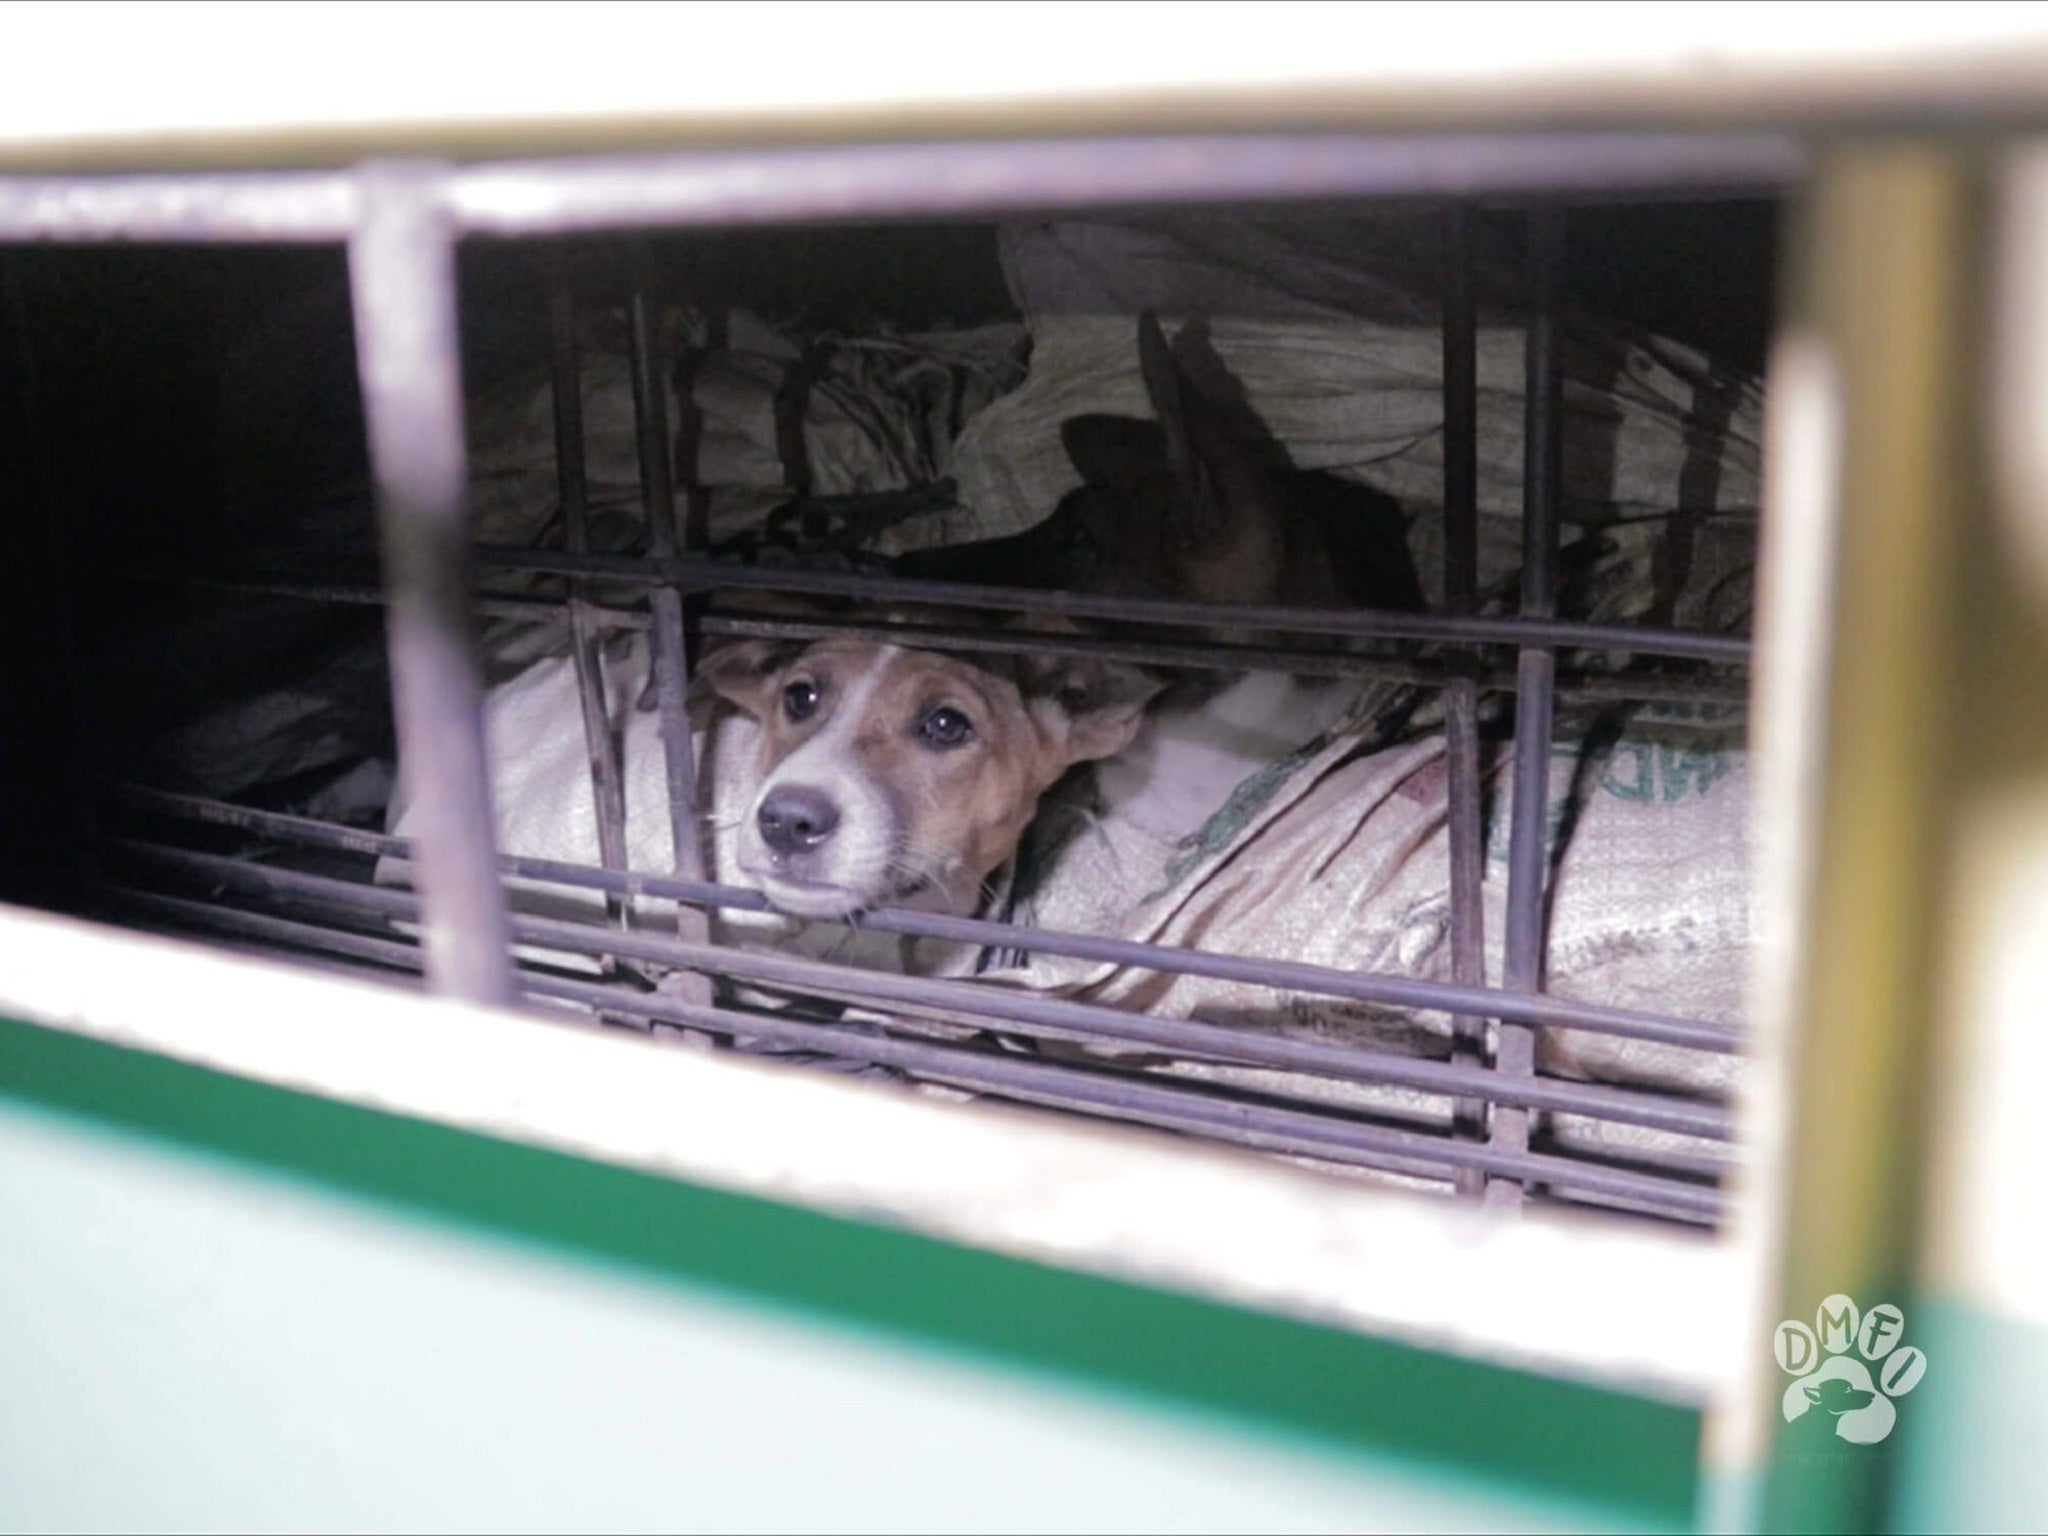 An undercover investigation by Dog Meat-Free Indonesia found about 13,700 dogs are captured or stolen every day to be slaughtered for their meat in the Indonesian city of Surakarta, or Solo.